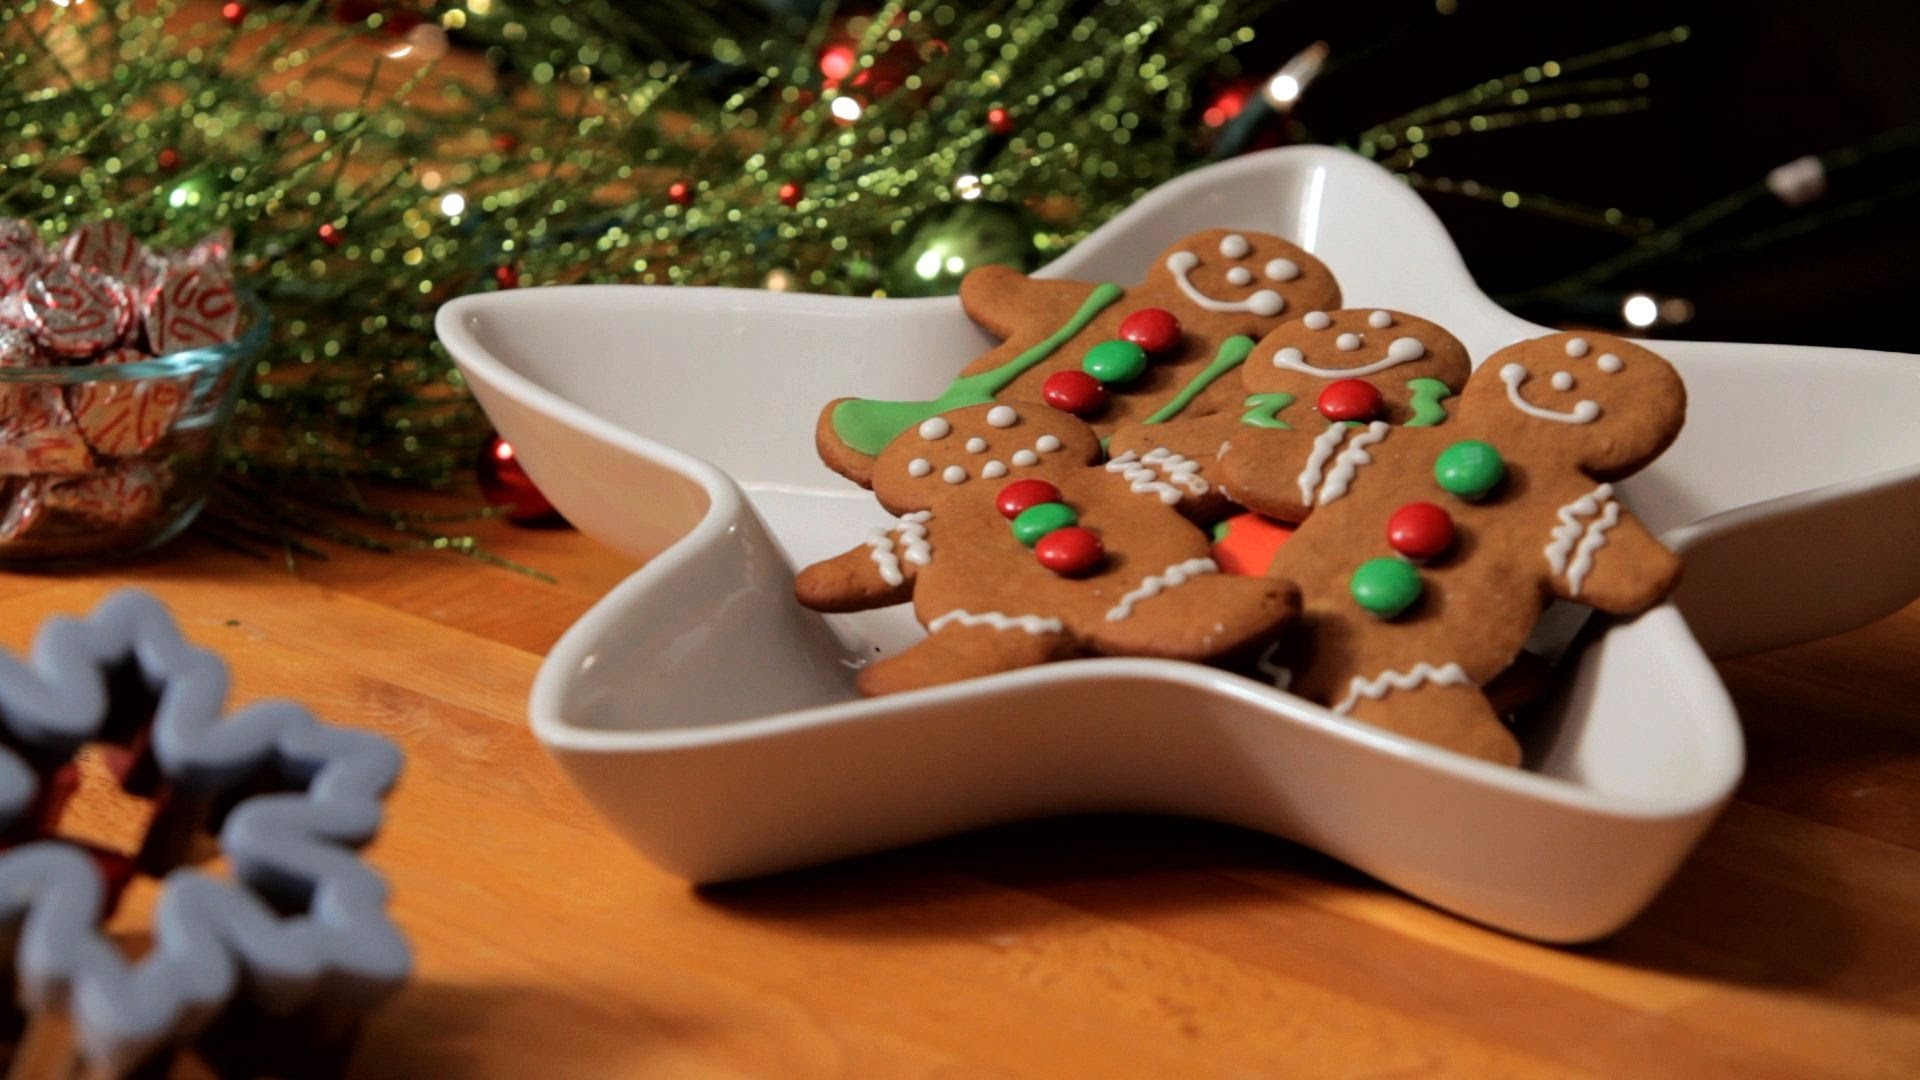 1920x1080 How to Decorate Gingerbread Men | Christmas Cookies - YouTube